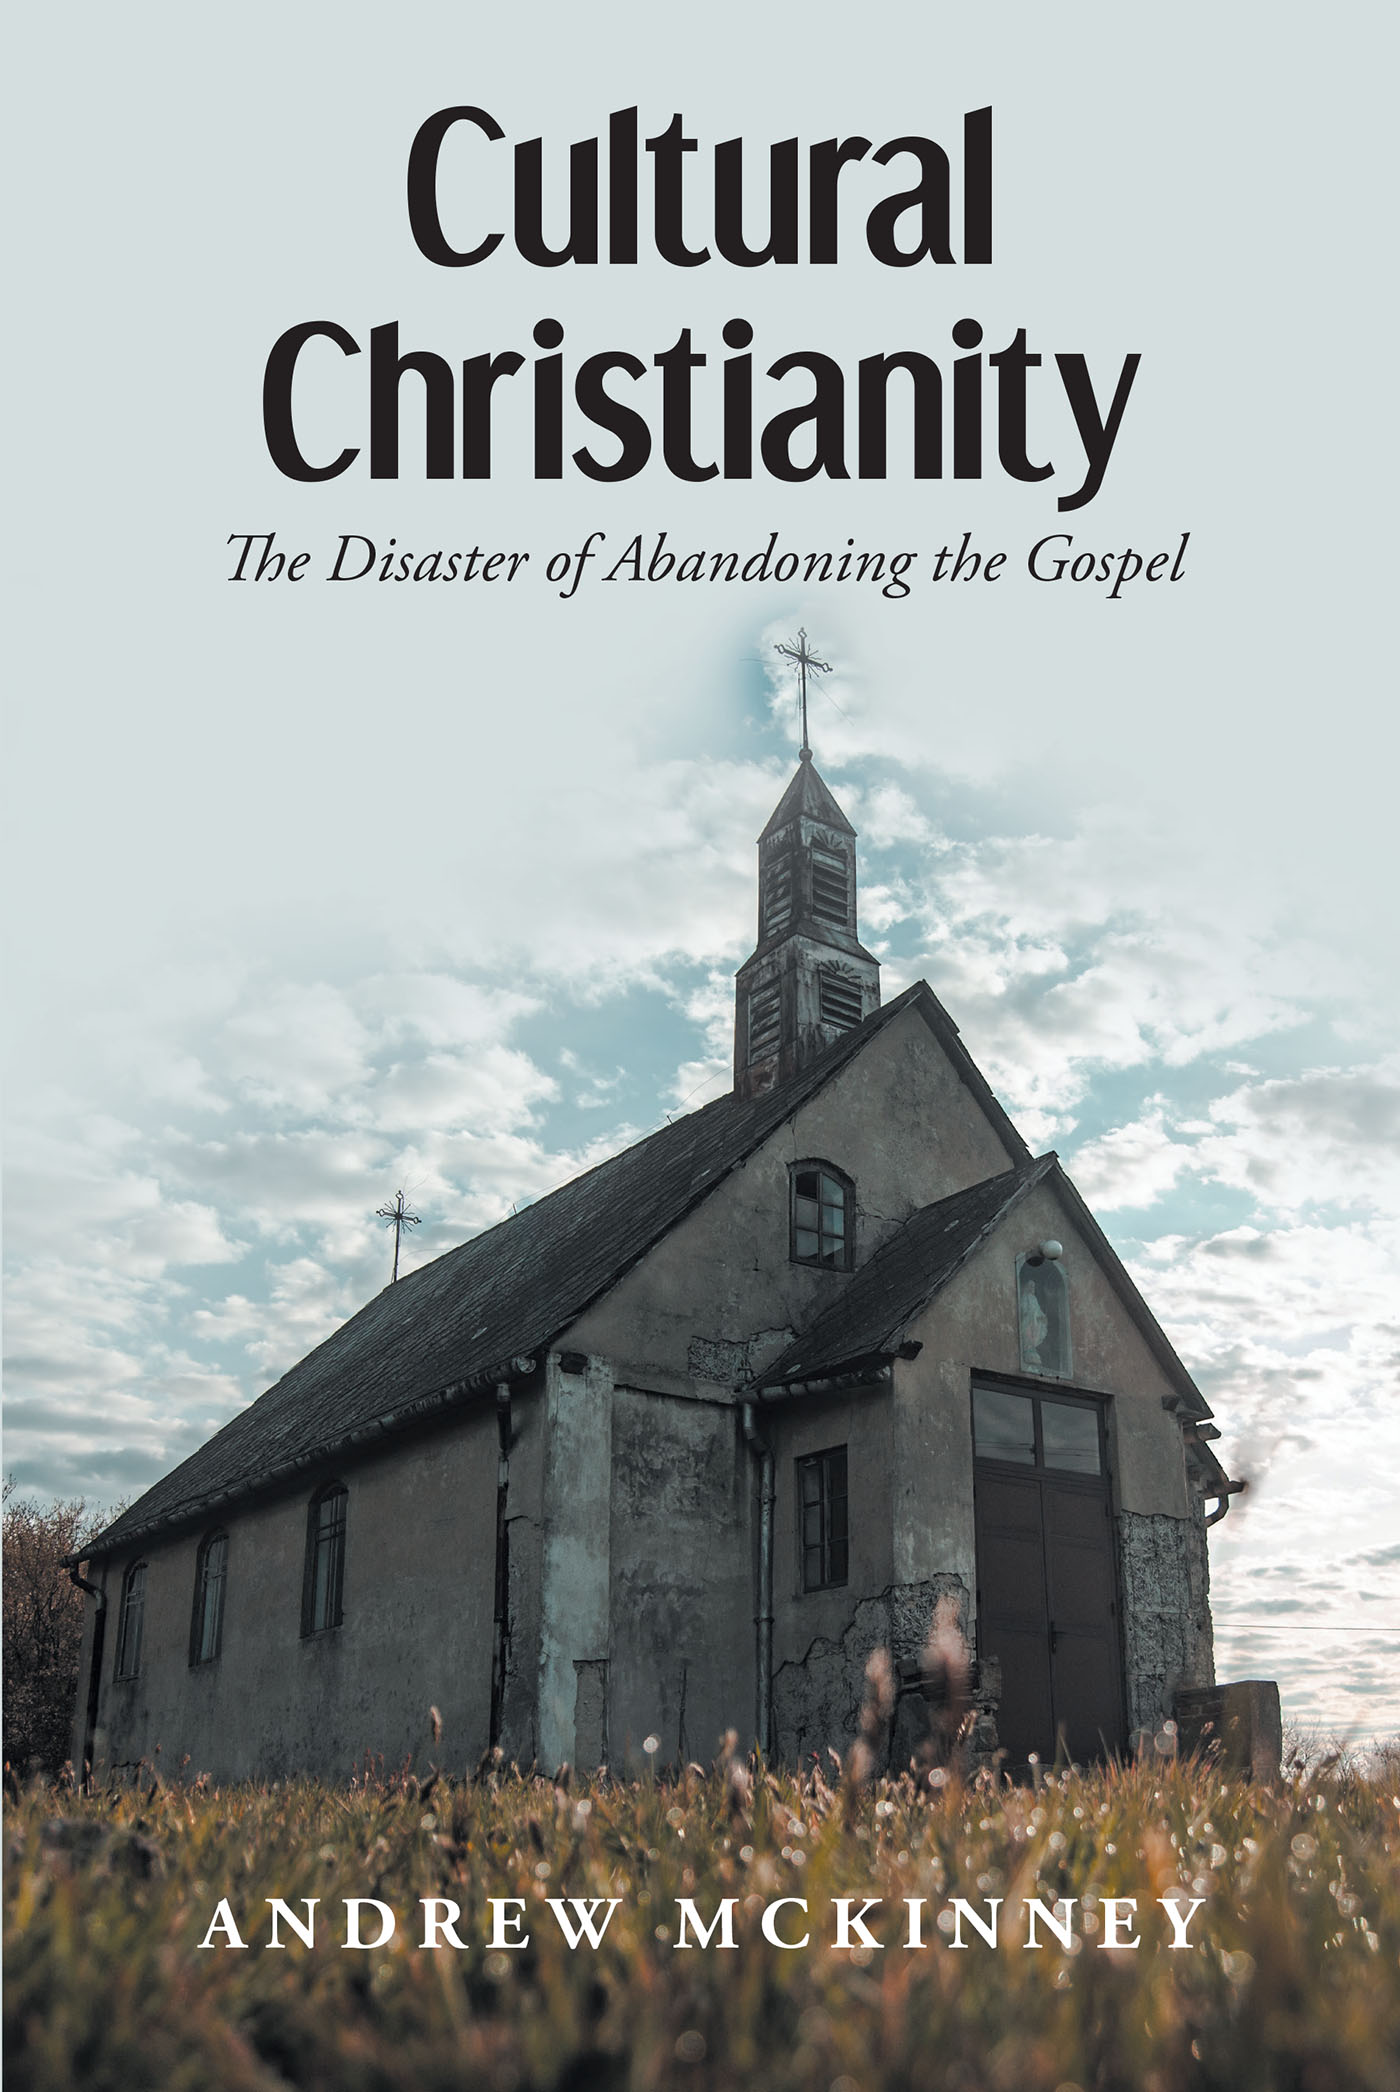 Andrew McKinney’s Newly Released “Cultural Christianity: The Disaster of Abandoning the Gospel” is a Dynamic Call for a Return to Biblical Teachings